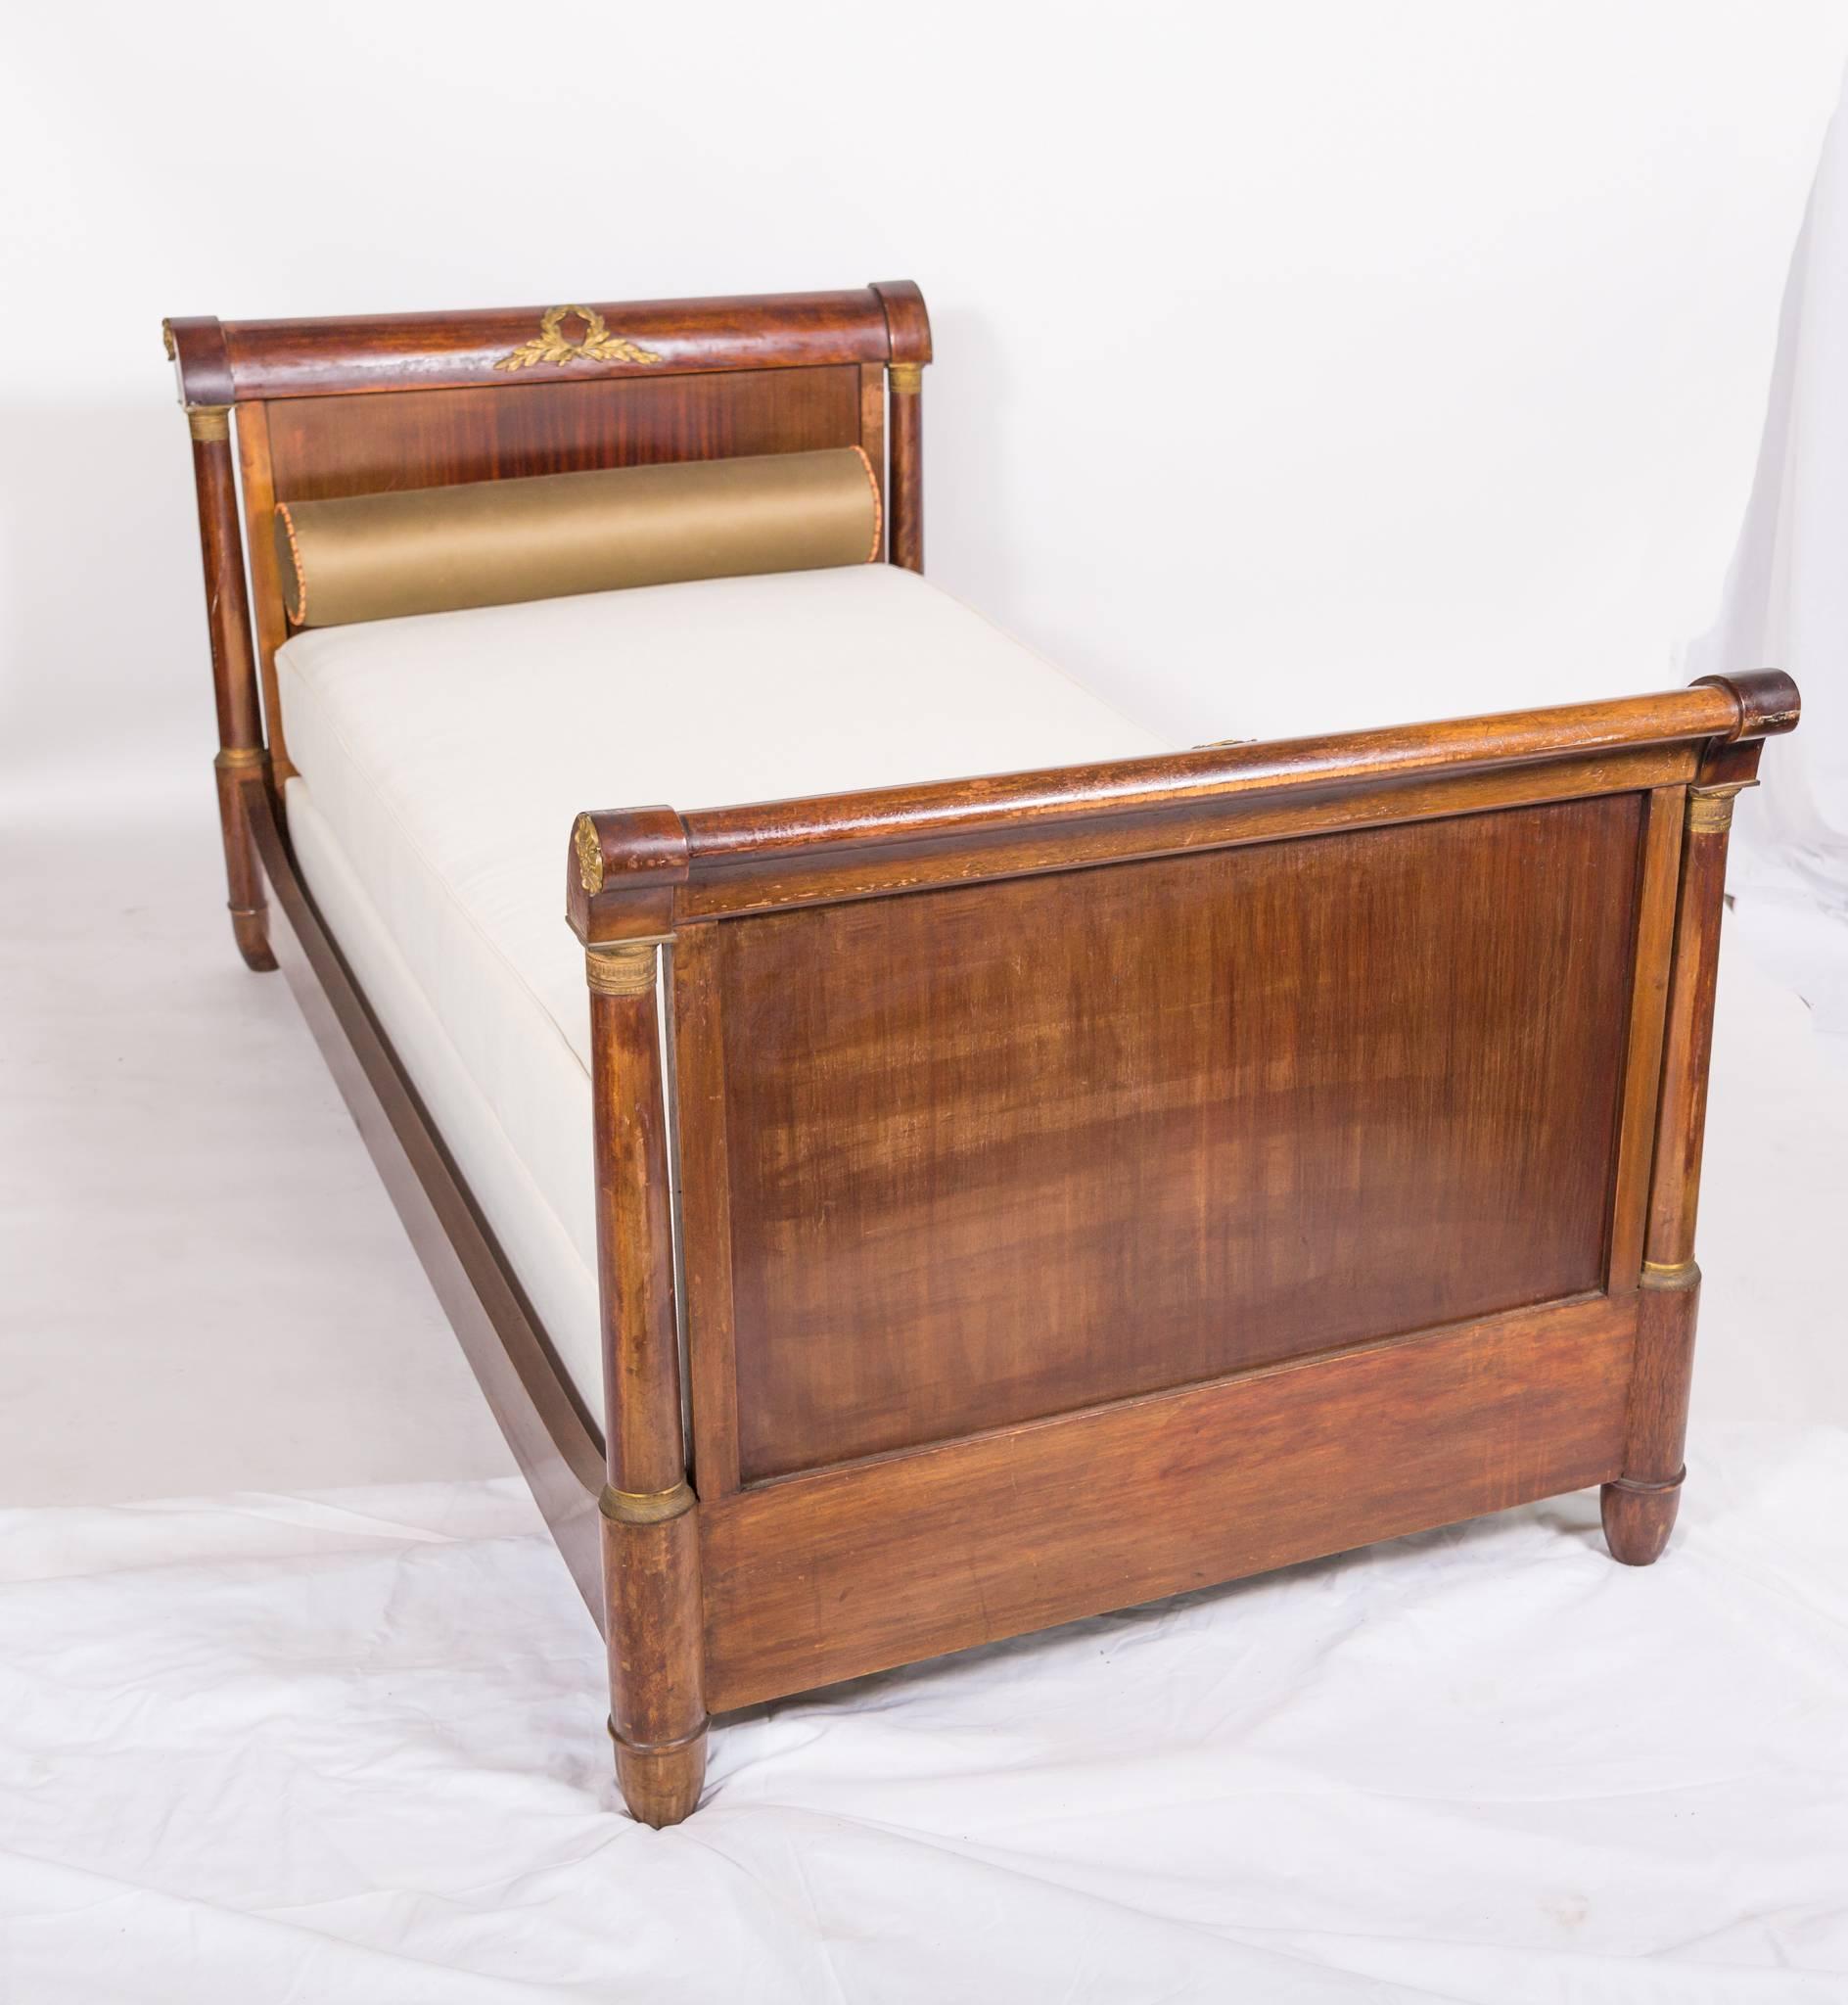 Brass 19c Empire Daybed